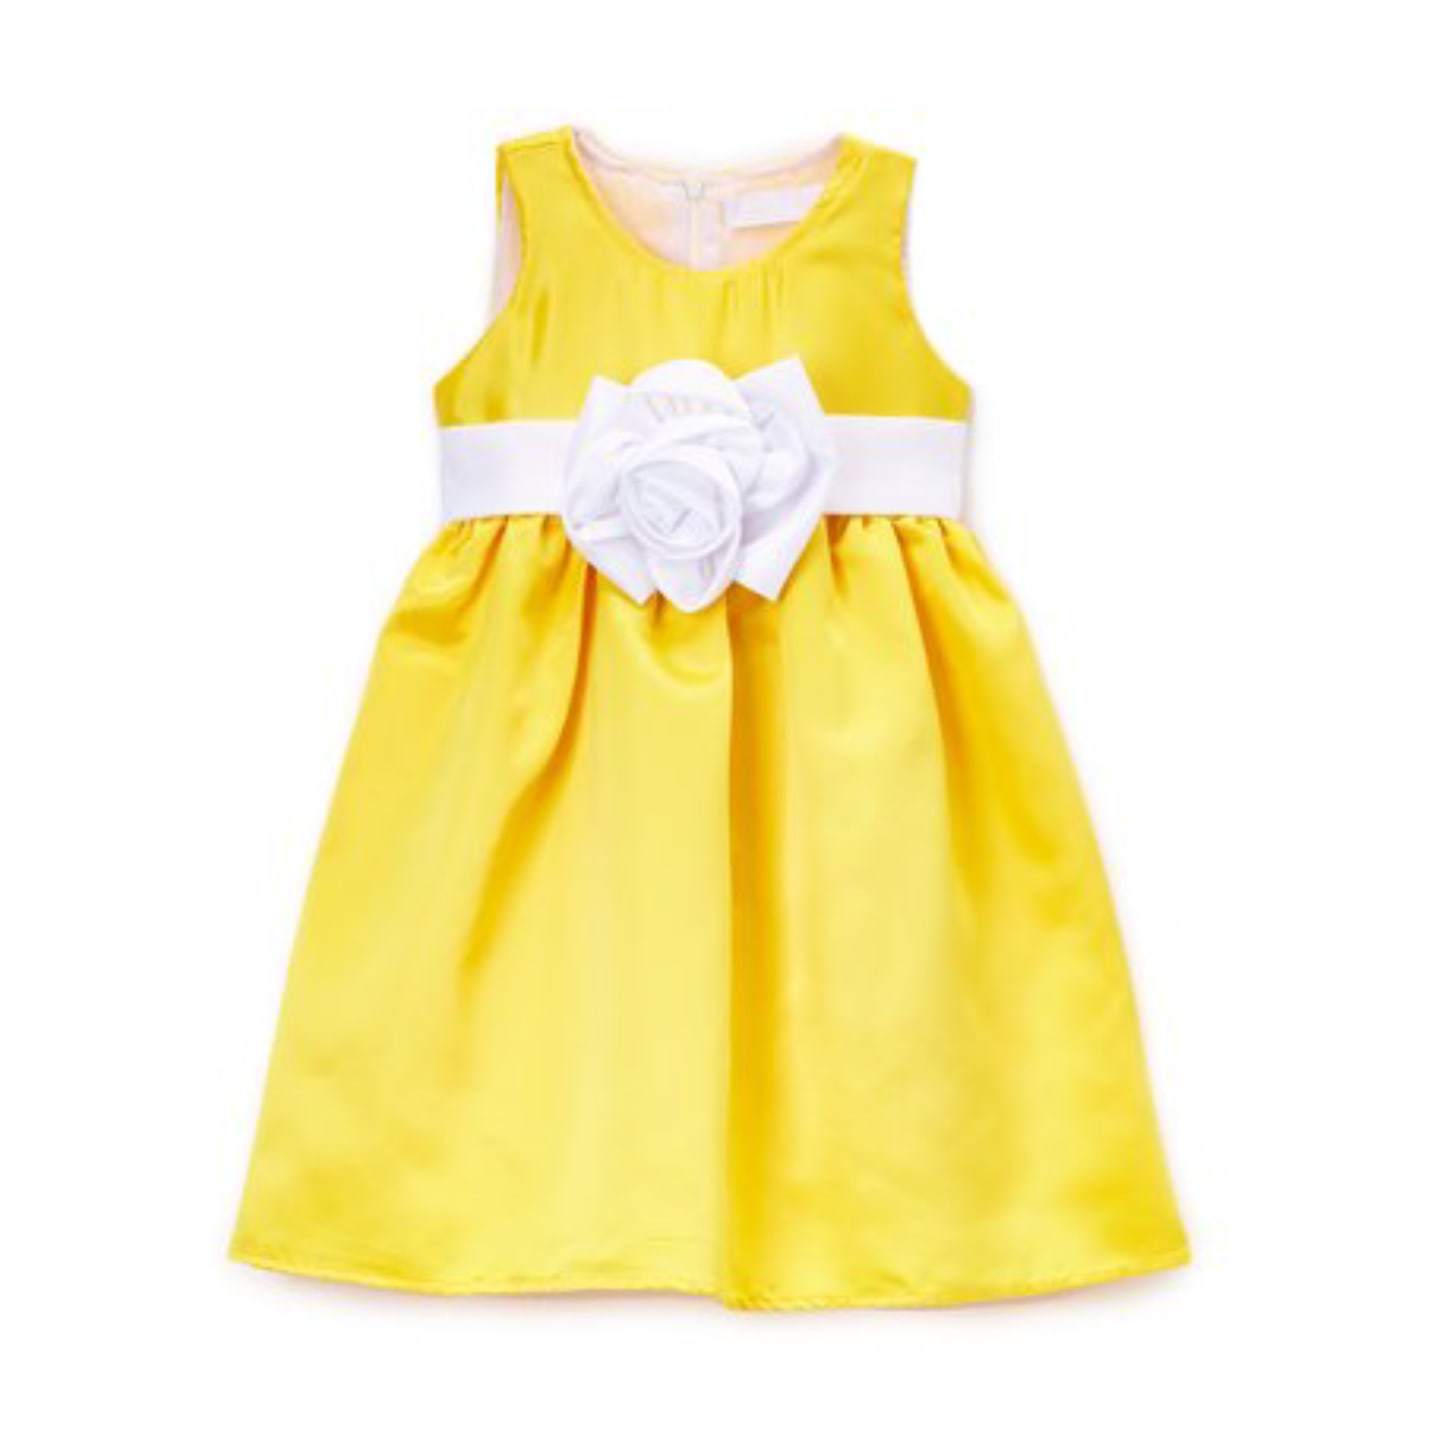 Z by Yoon Girls Yellow Flower A-Line Dress - Stockpoint Apparel Outlet